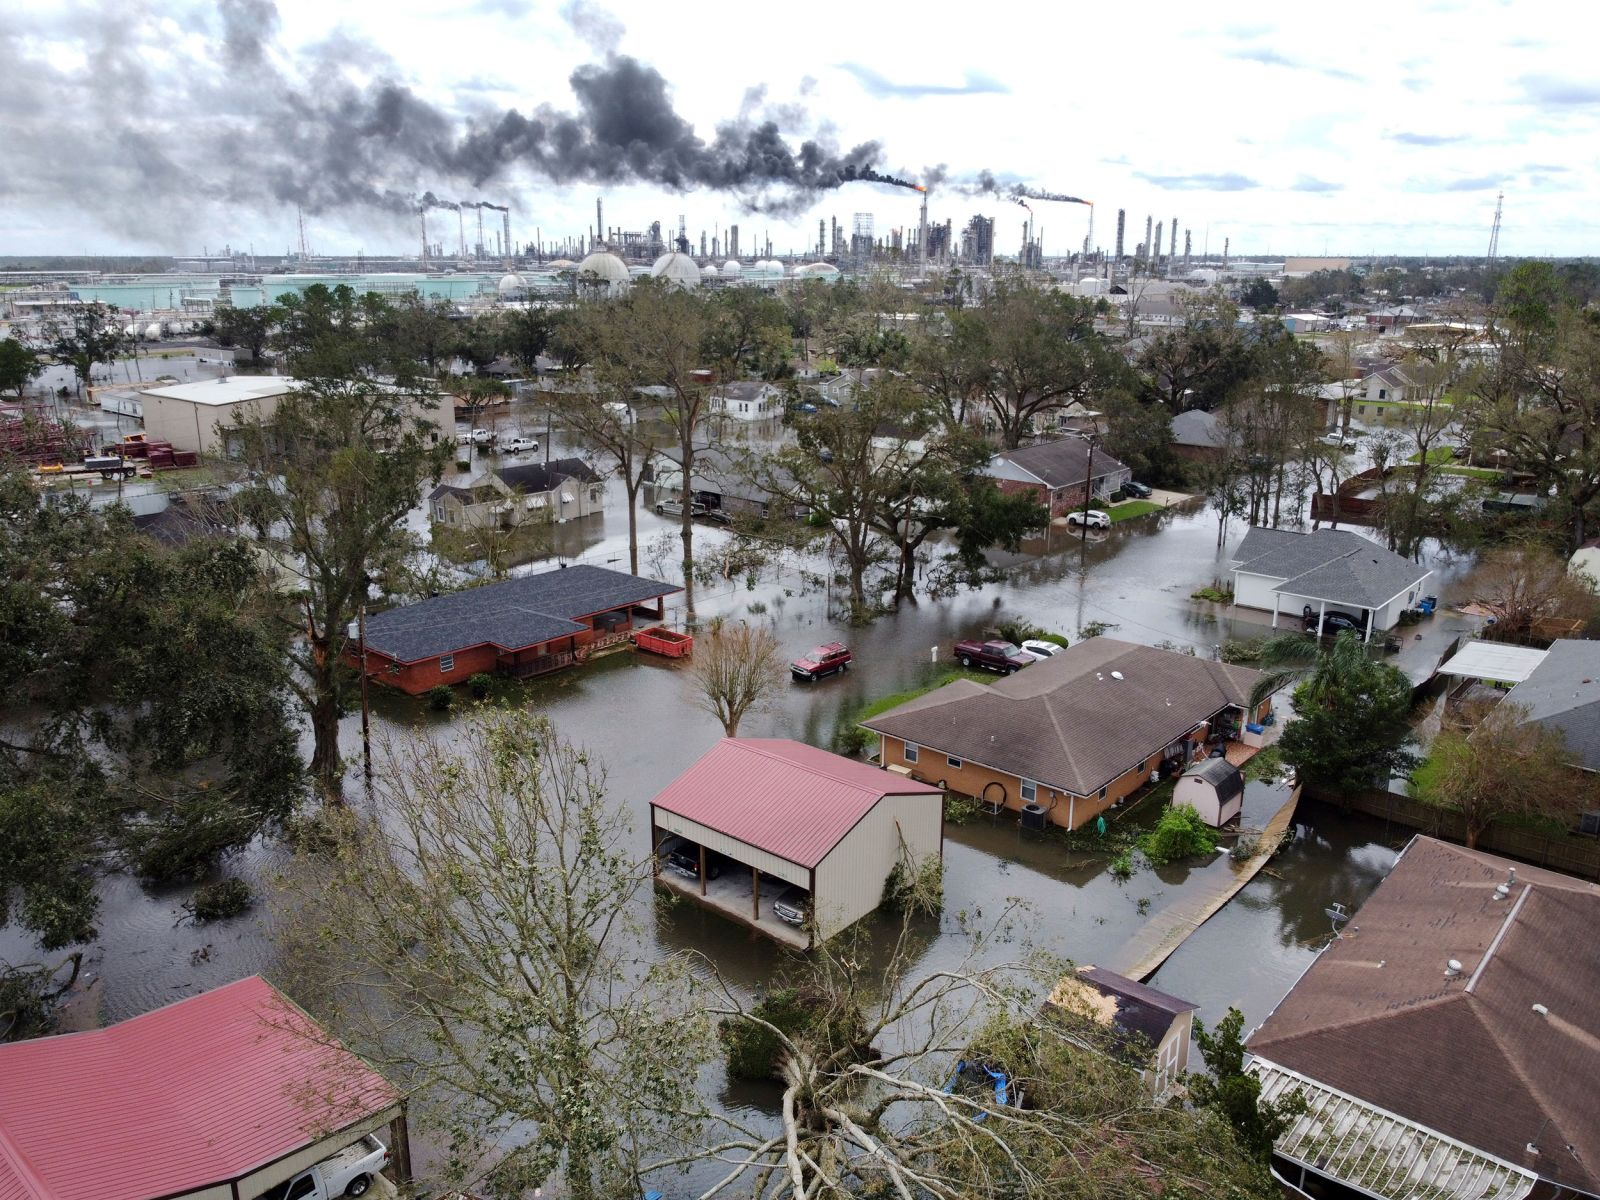 Chatting the Pictures: Hurricane Ida, Chemical Plants Flare Louisiana Gulf